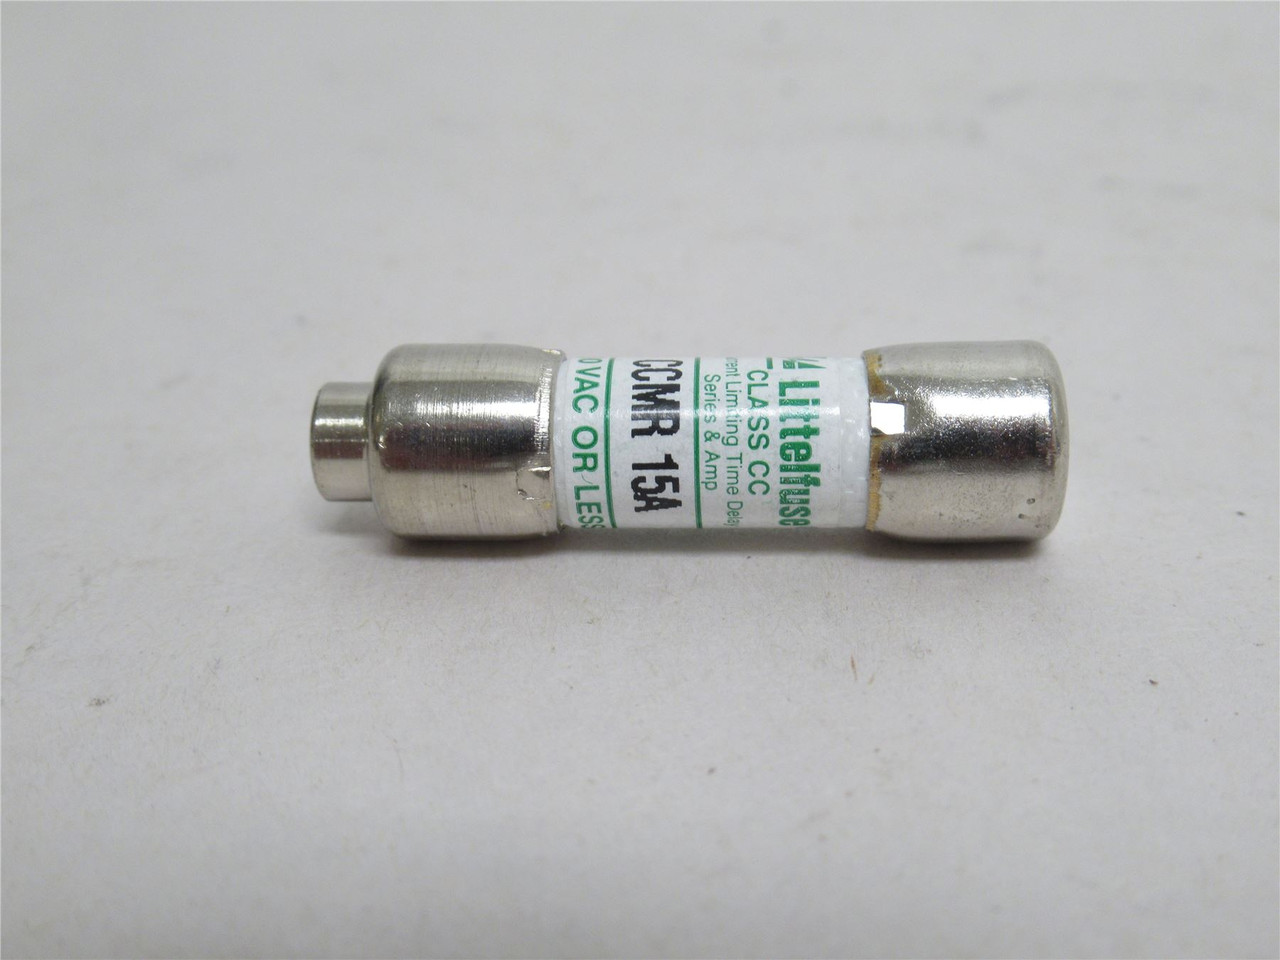 Littlefuse CCMR-15A; Dual Element Time Delay Fuse 15A; 600VAC